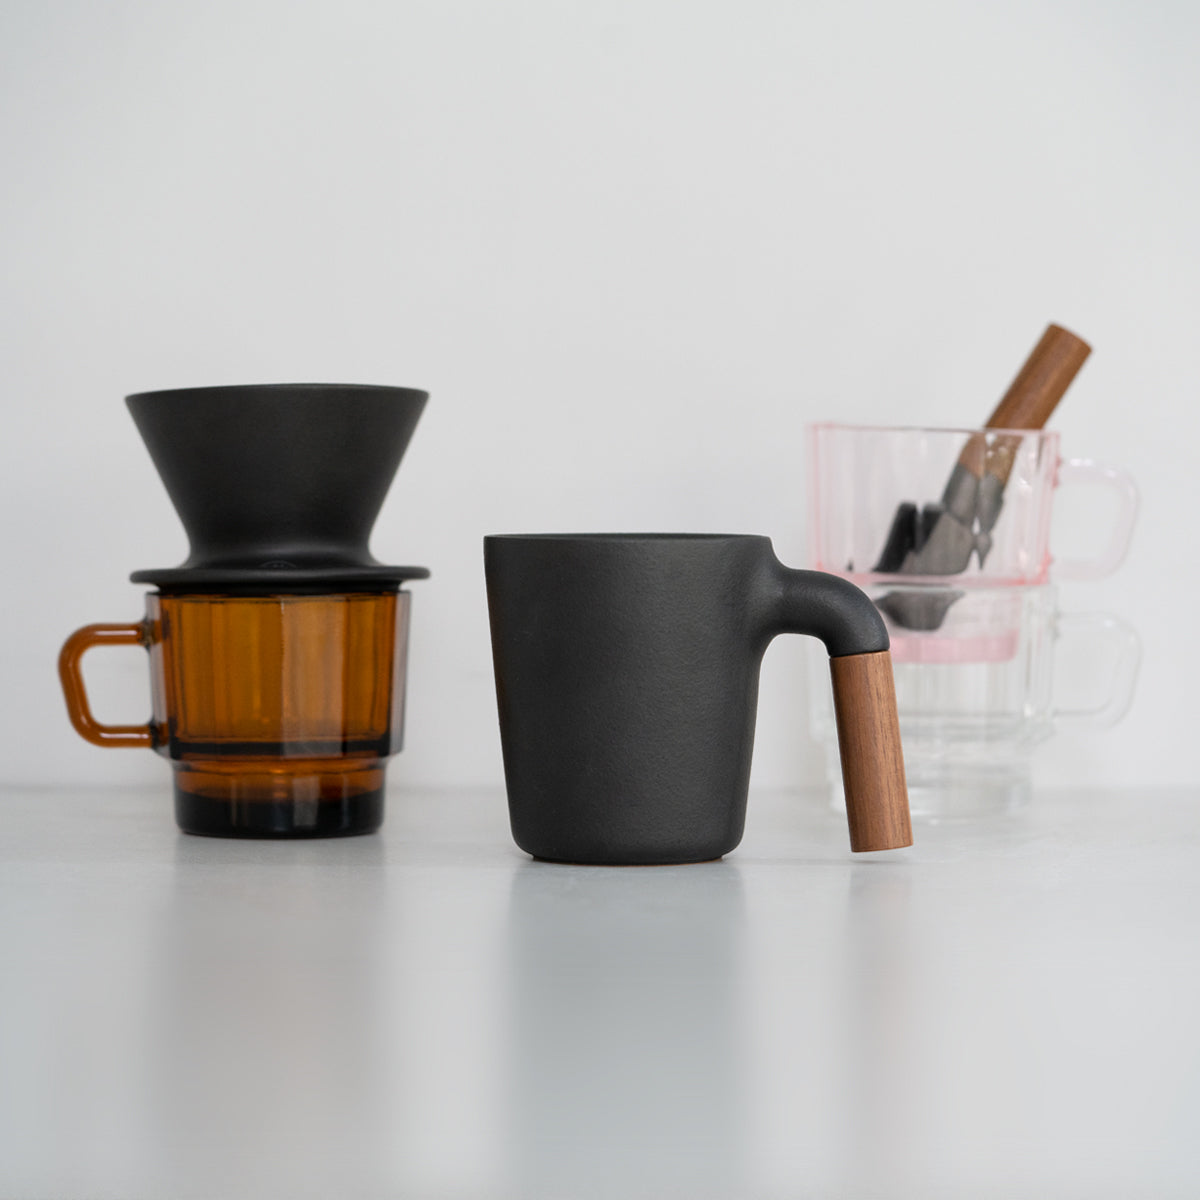 HMM coffee collection - ceramic mug and dripper, cast iron scoop and recycled glass cup.